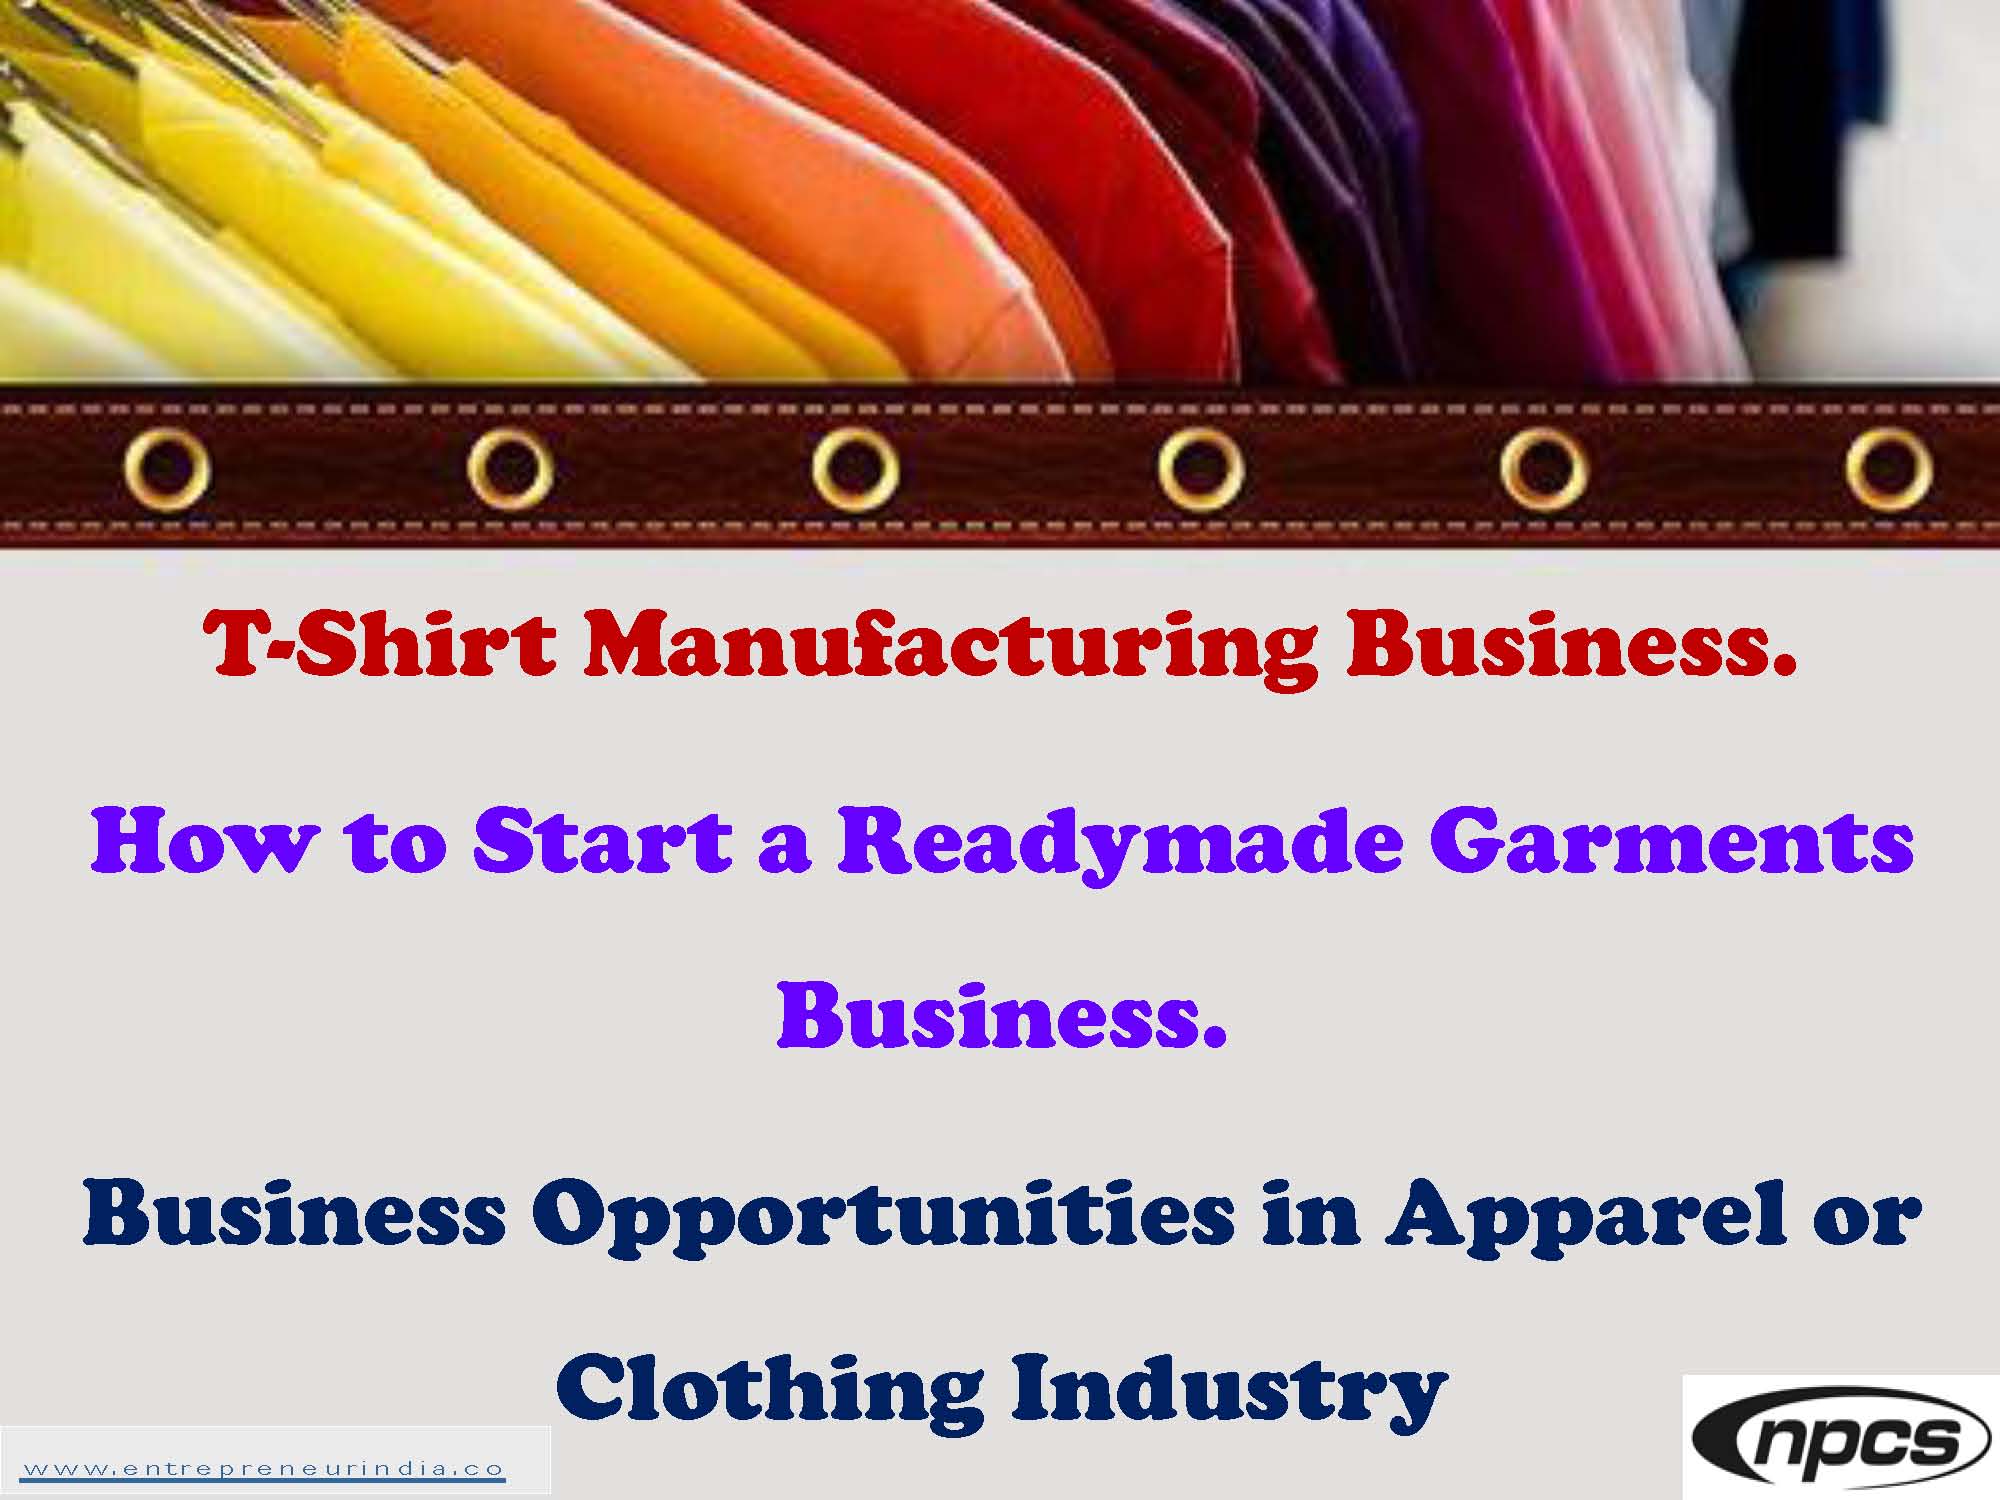 T-Shirt Manufacturing Business